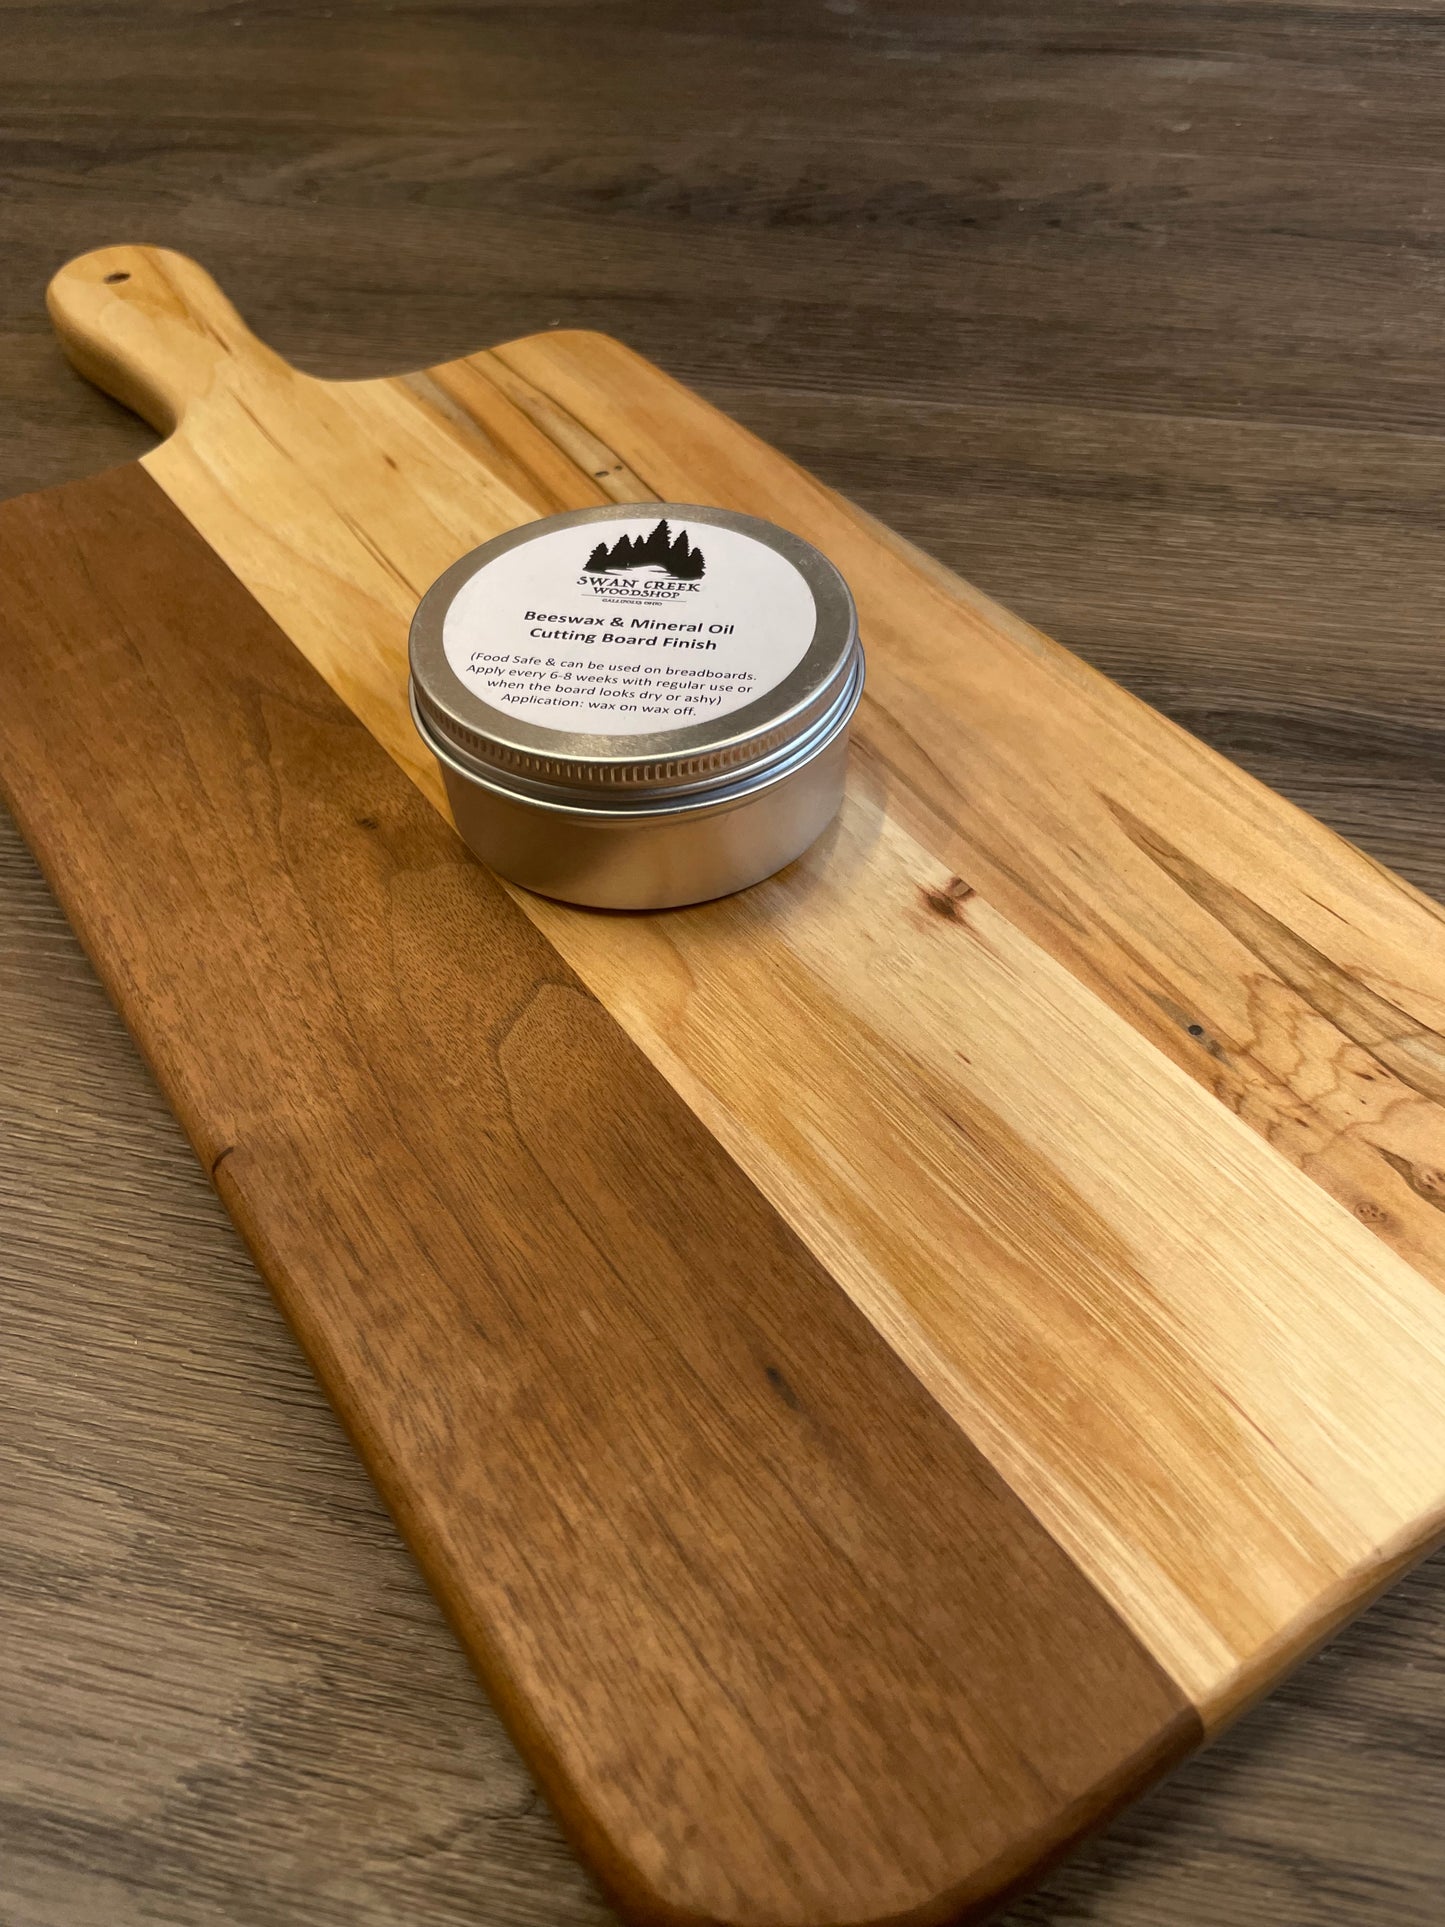 Beeswax & Mineral oil Cutting Board Finish